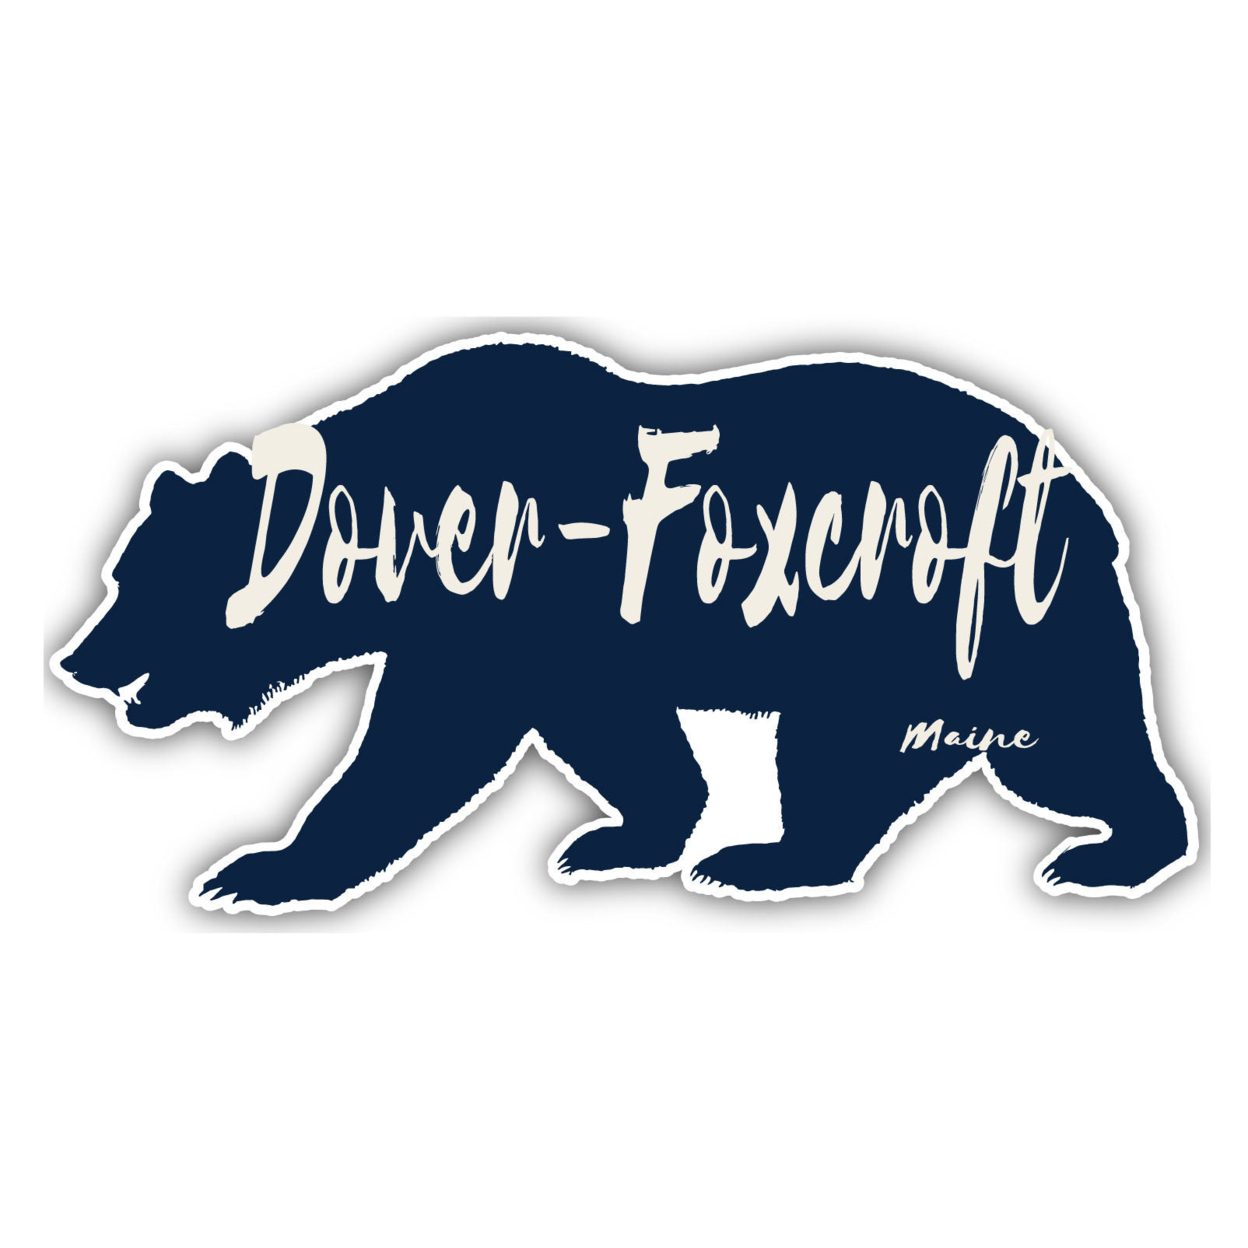 Dover-Foxcroft Maine Souvenir Decorative Stickers (Choose Theme And Size) - 4-Pack, 2-Inch, Bear